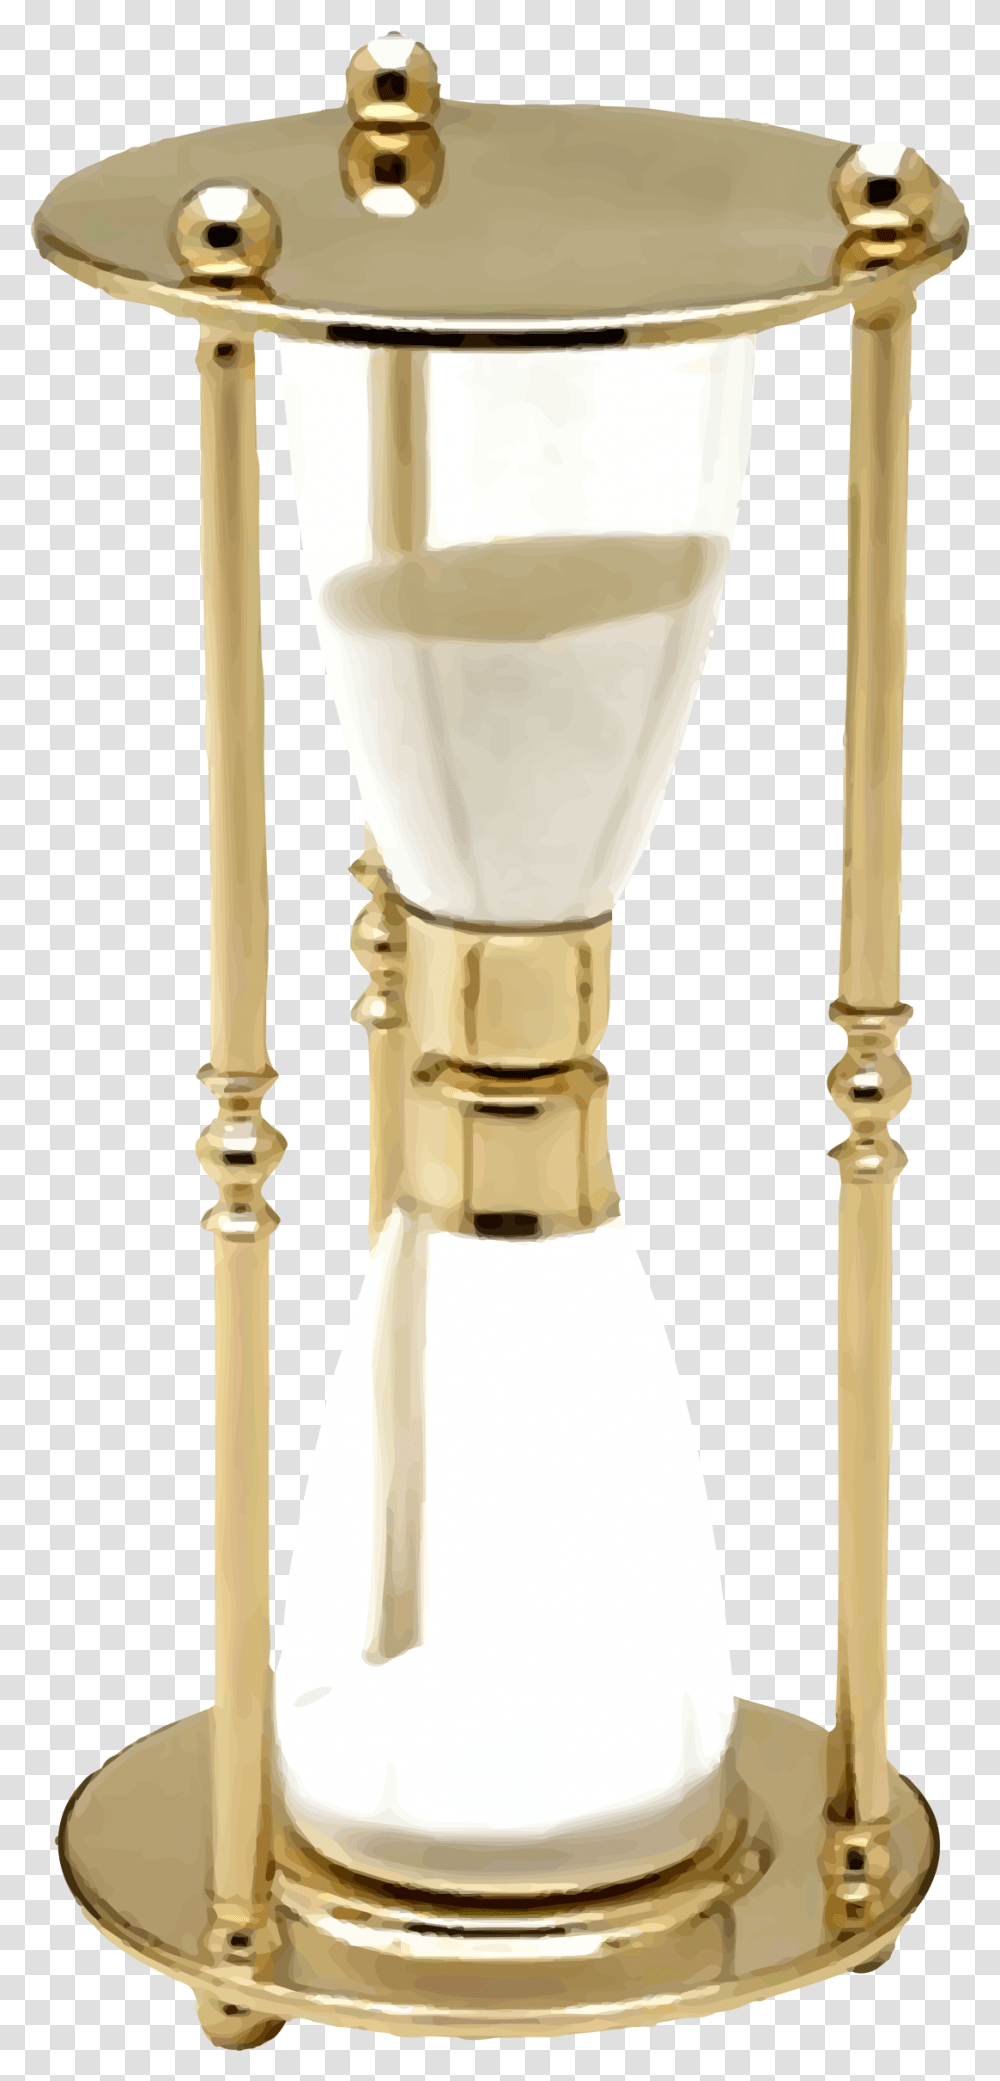 Hourglass 5 Clip Arts Hourglass, Lighting, Lamp, Table Lamp, Lampshade Transparent Png